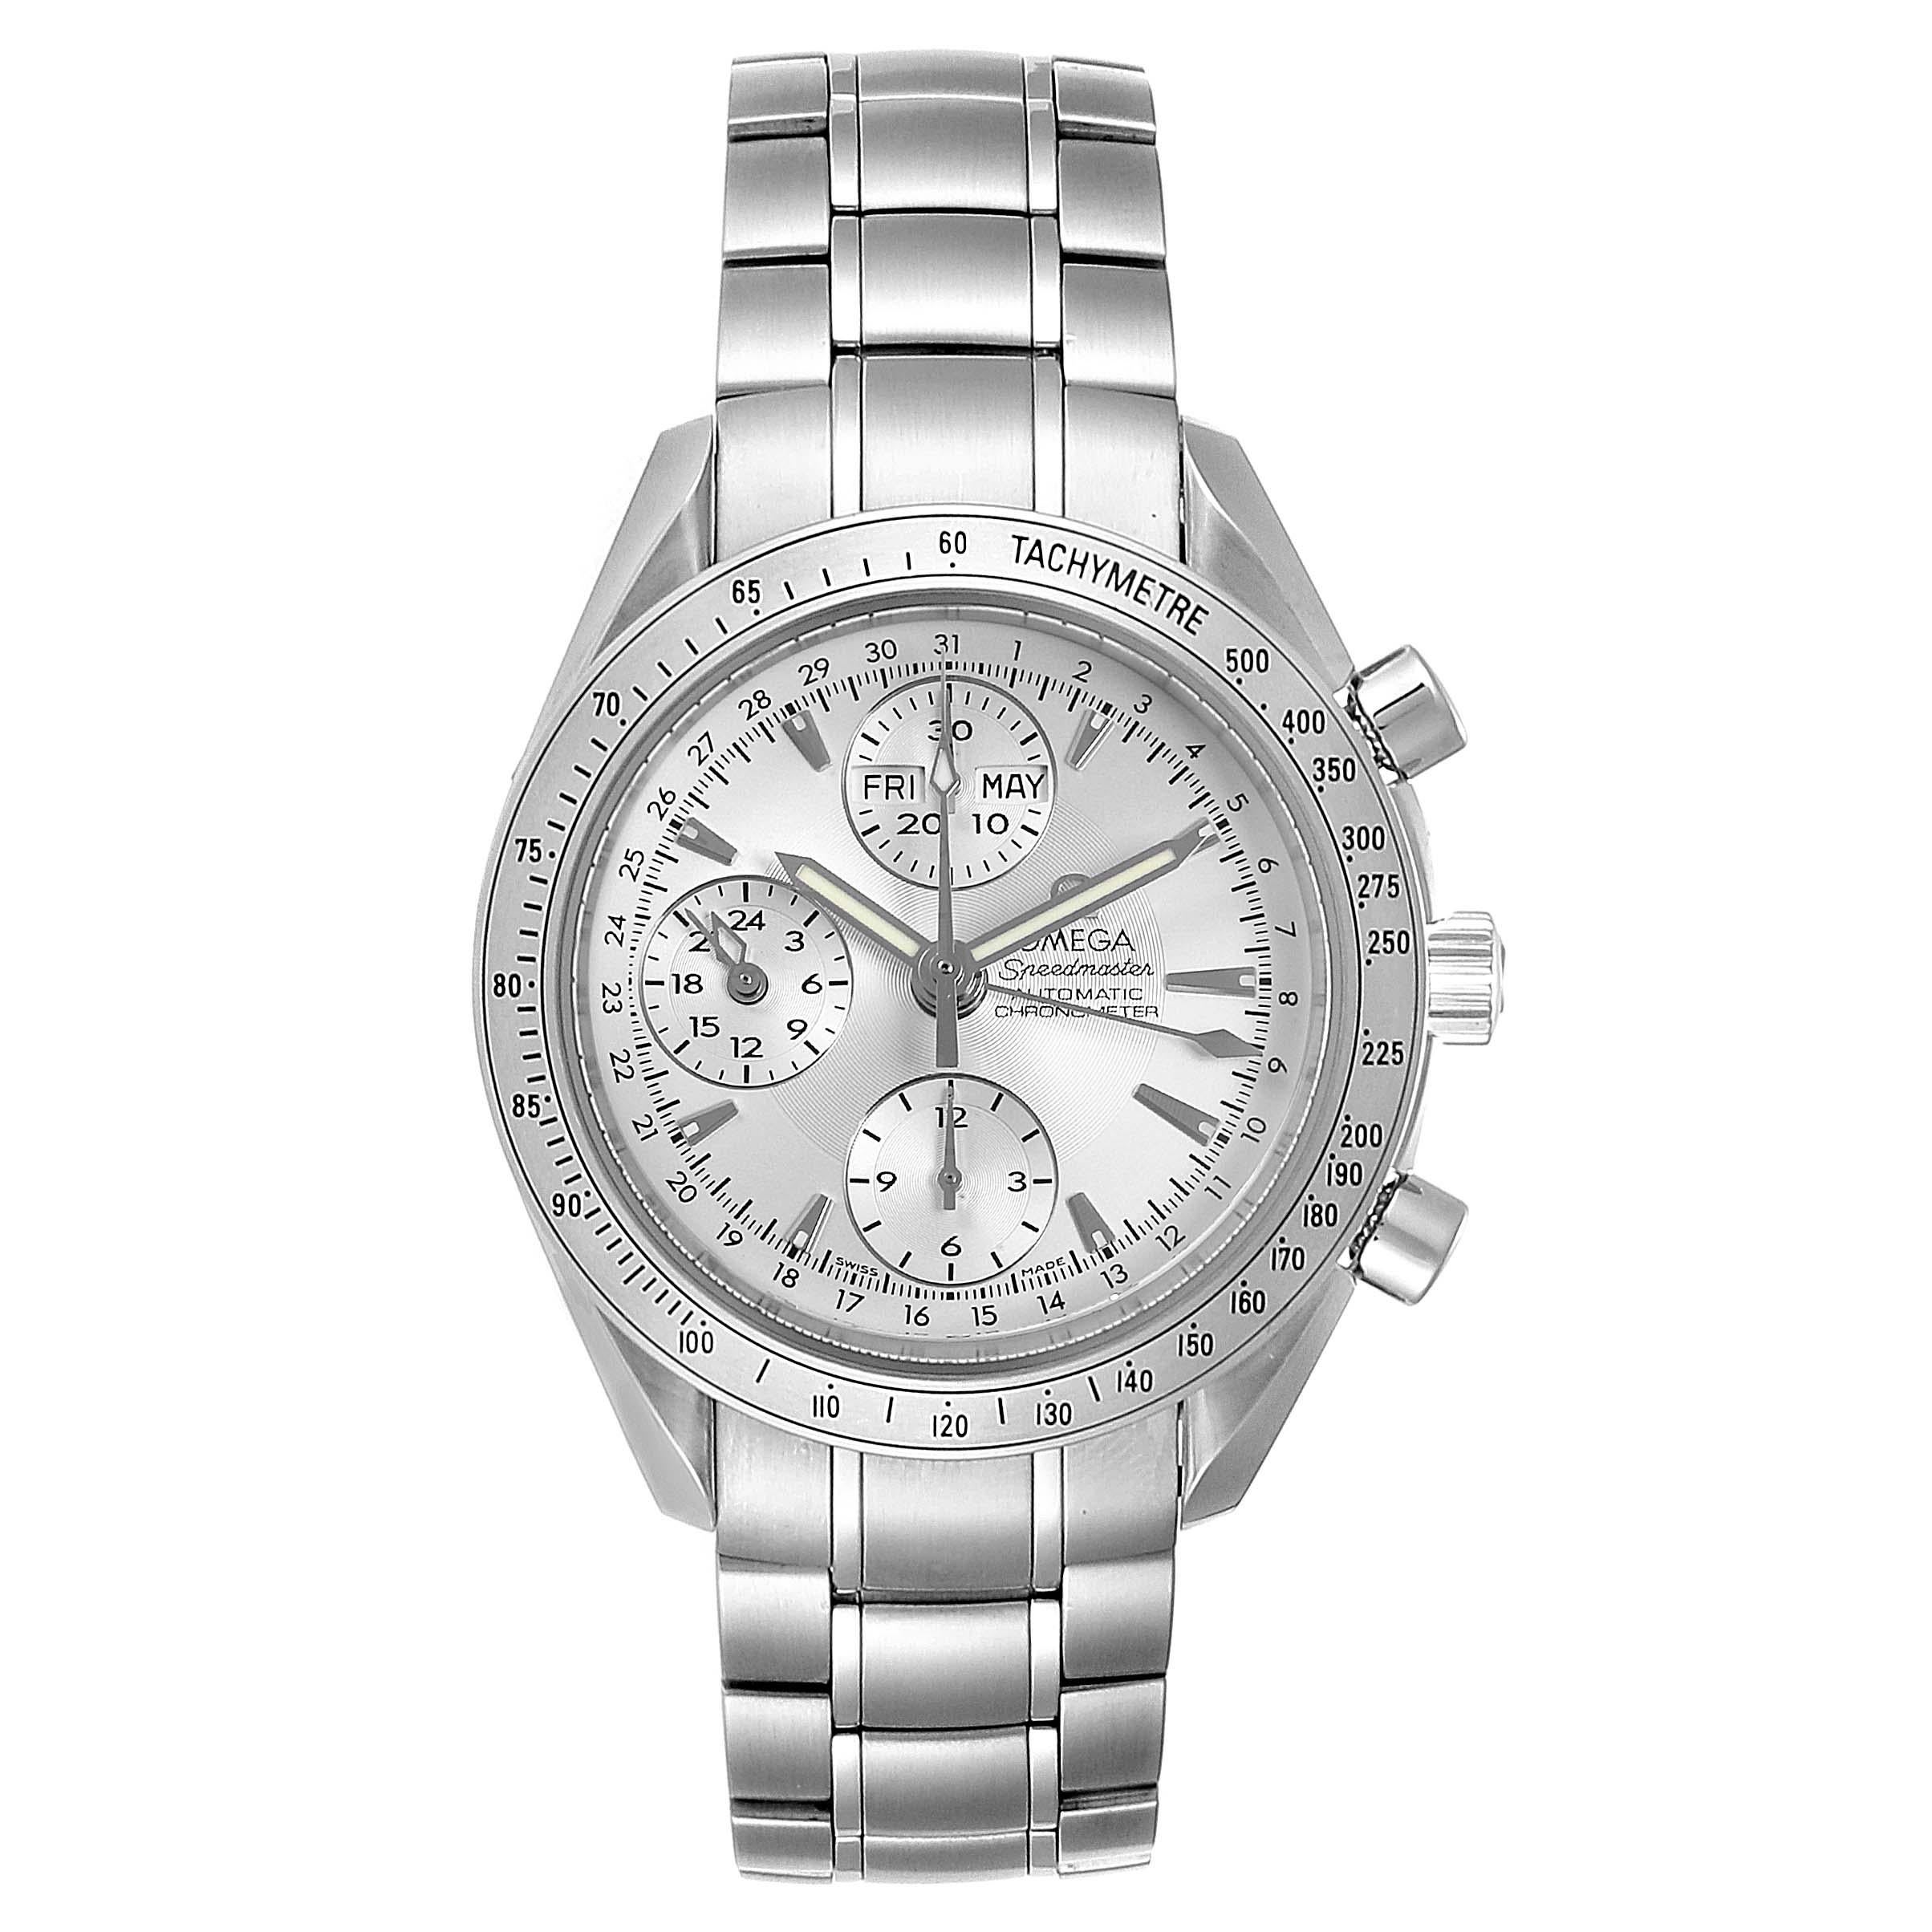 Omega Speedmaster Day Date Chronograph Silver Dial Mens Watch 3523.30.00. Automatic self-winding chronograph movement. Day, date and month indications. Stainless steel round case 39.0 mm in diameter. Stainless steel bezel with tachymetric scale.